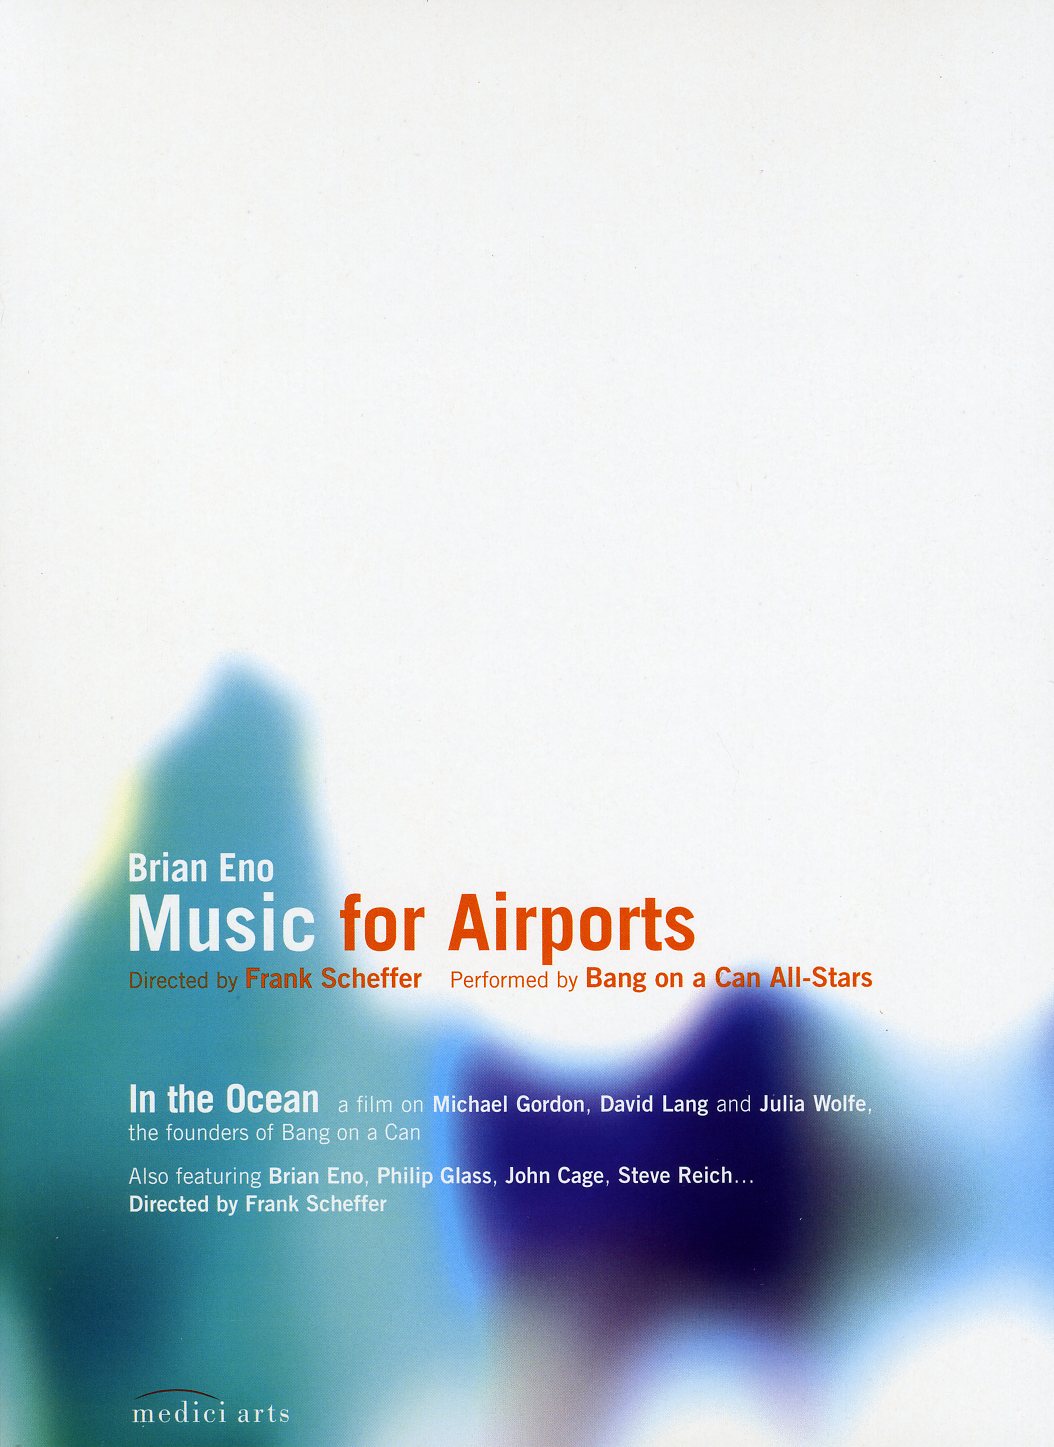 MUSIC FOR AIRPORTS & IN THE OCEAN / (FULL SUB)